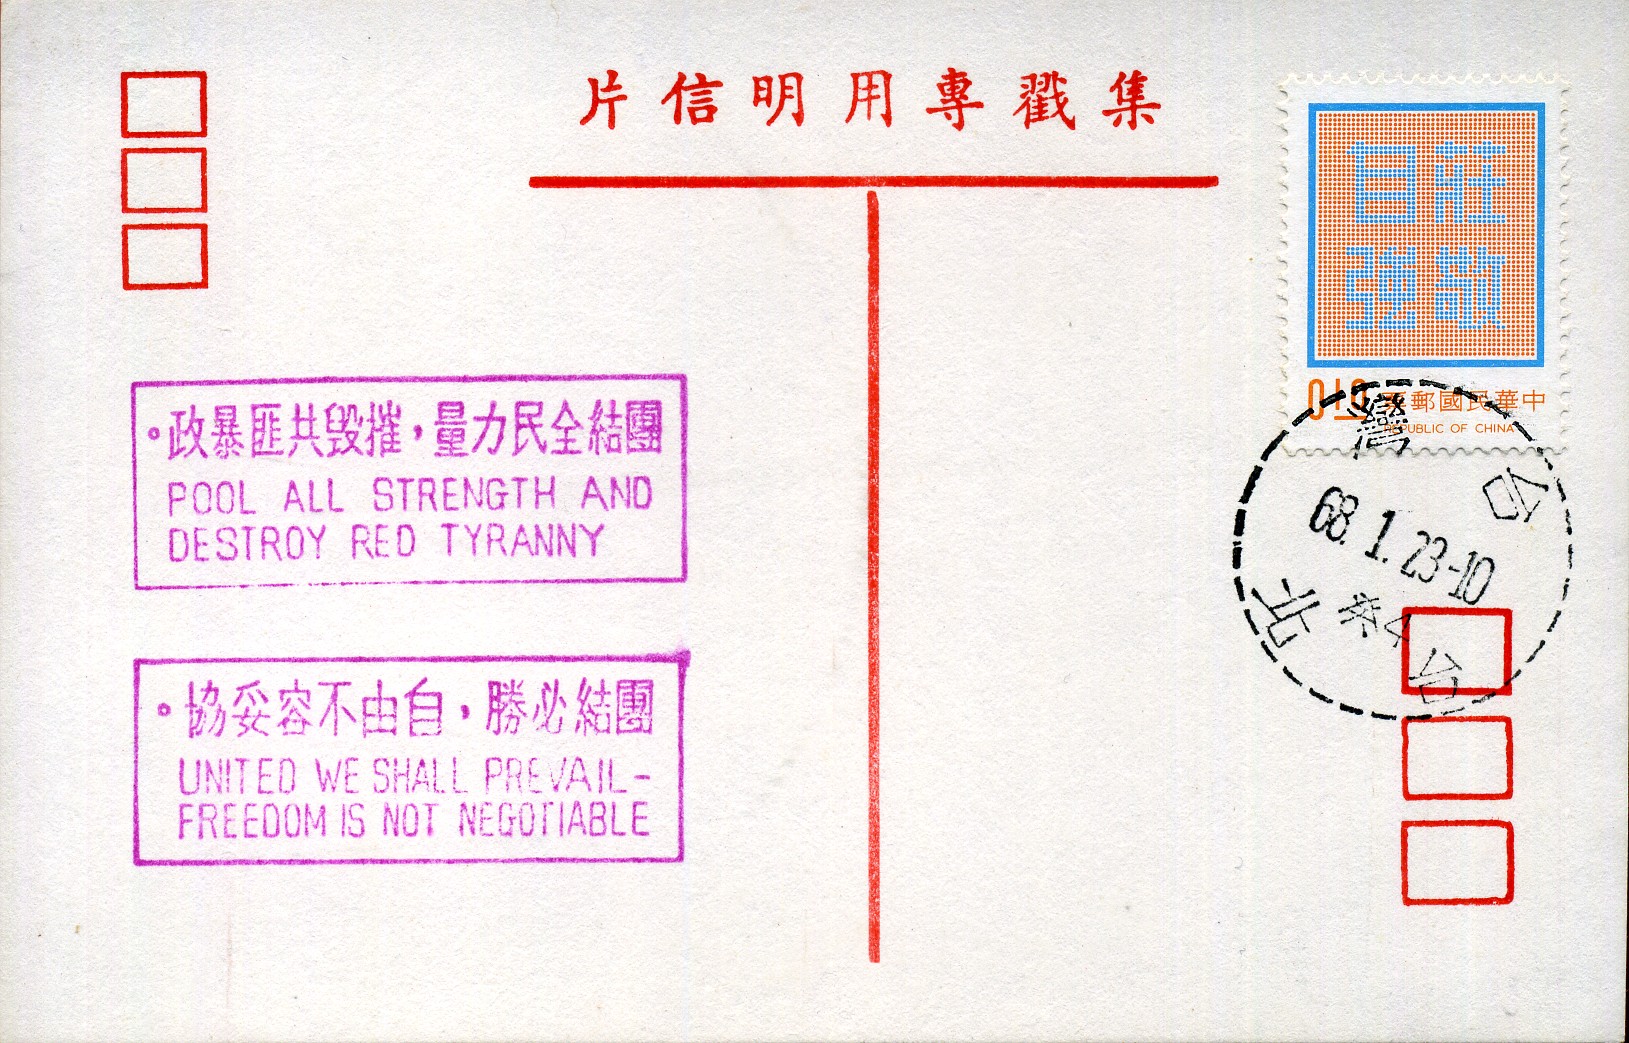 United we shall prevail - freedom is not negotiable - Handstempel – lila - Taipeh (?)